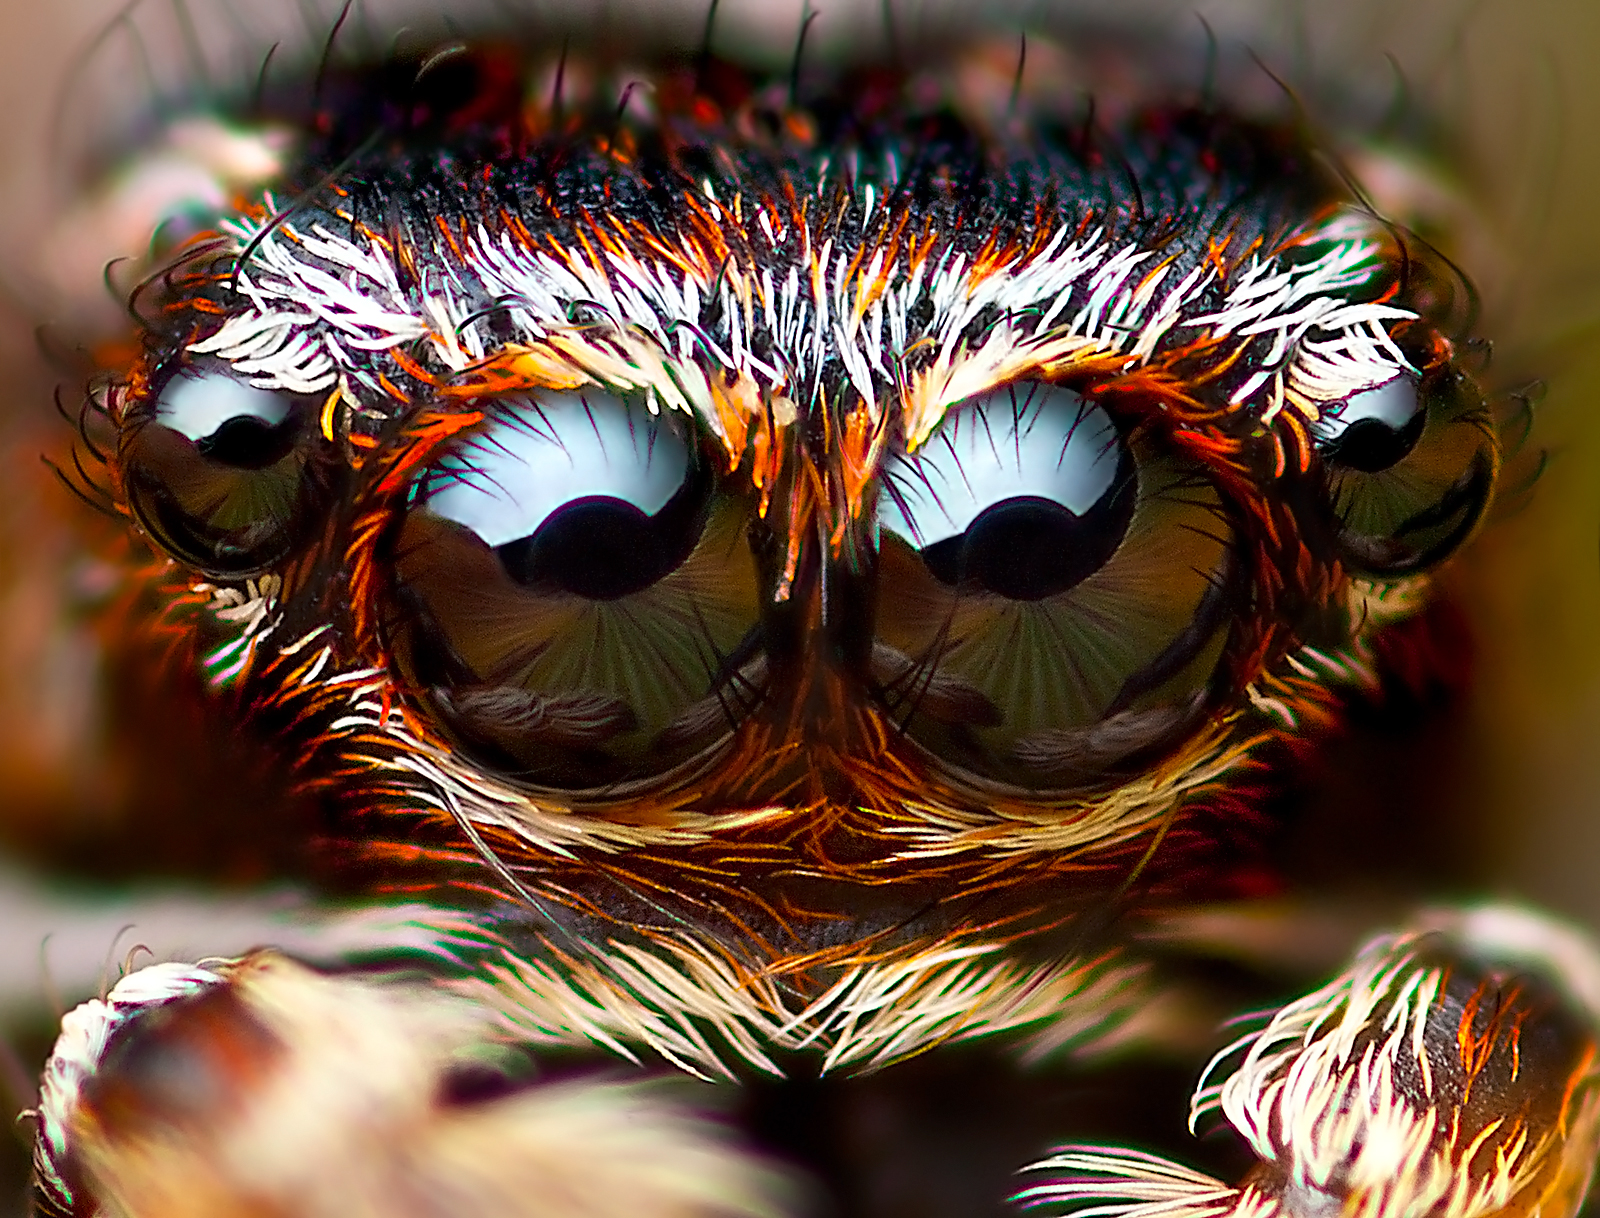 Wallpaper, picture, portrait, macro, green, nature, beautiful, animal, Canon, photography, spider, photo, jumping, eyes, colours, pentax, spiders, 28mm, stack, lukas, colourful, reversed, supermacro, Bellows, median, Lithuania, jumpingspider